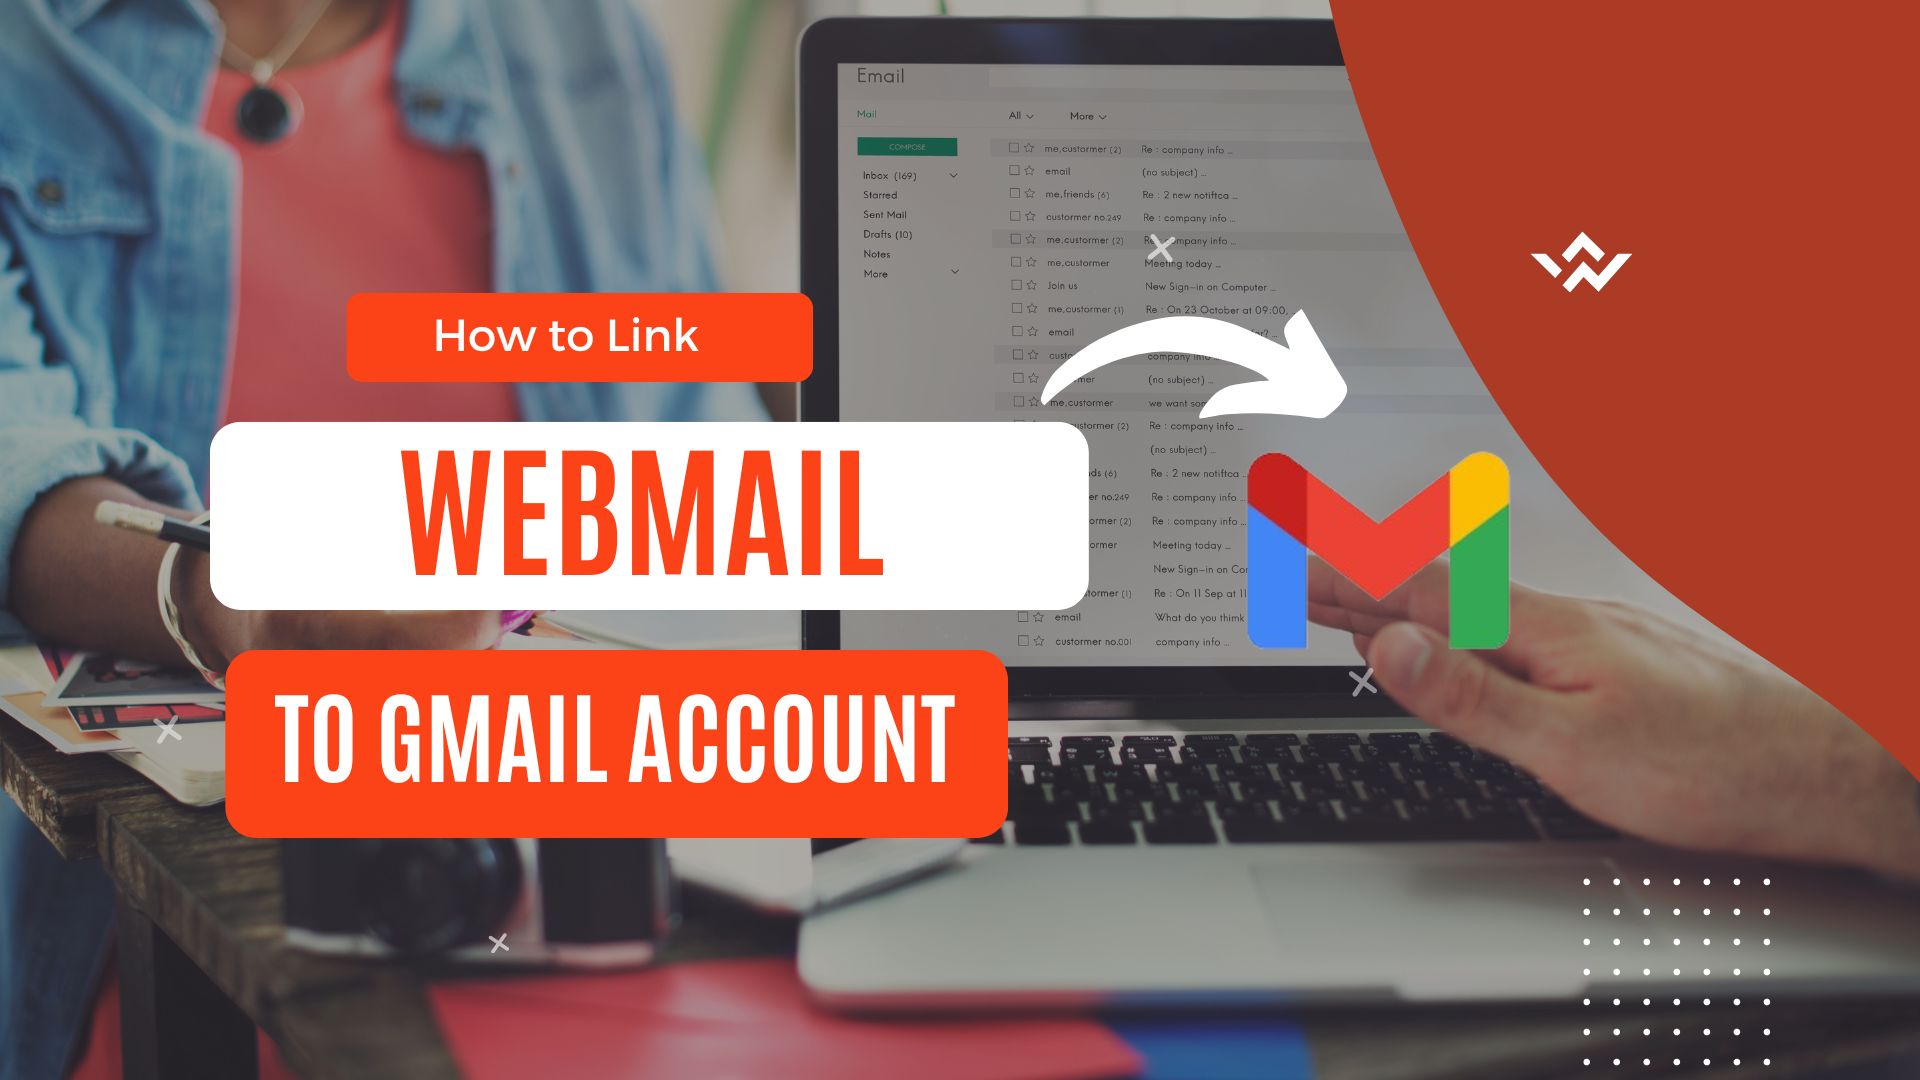 How to Link a Webmail Business Account to a Gmail Account